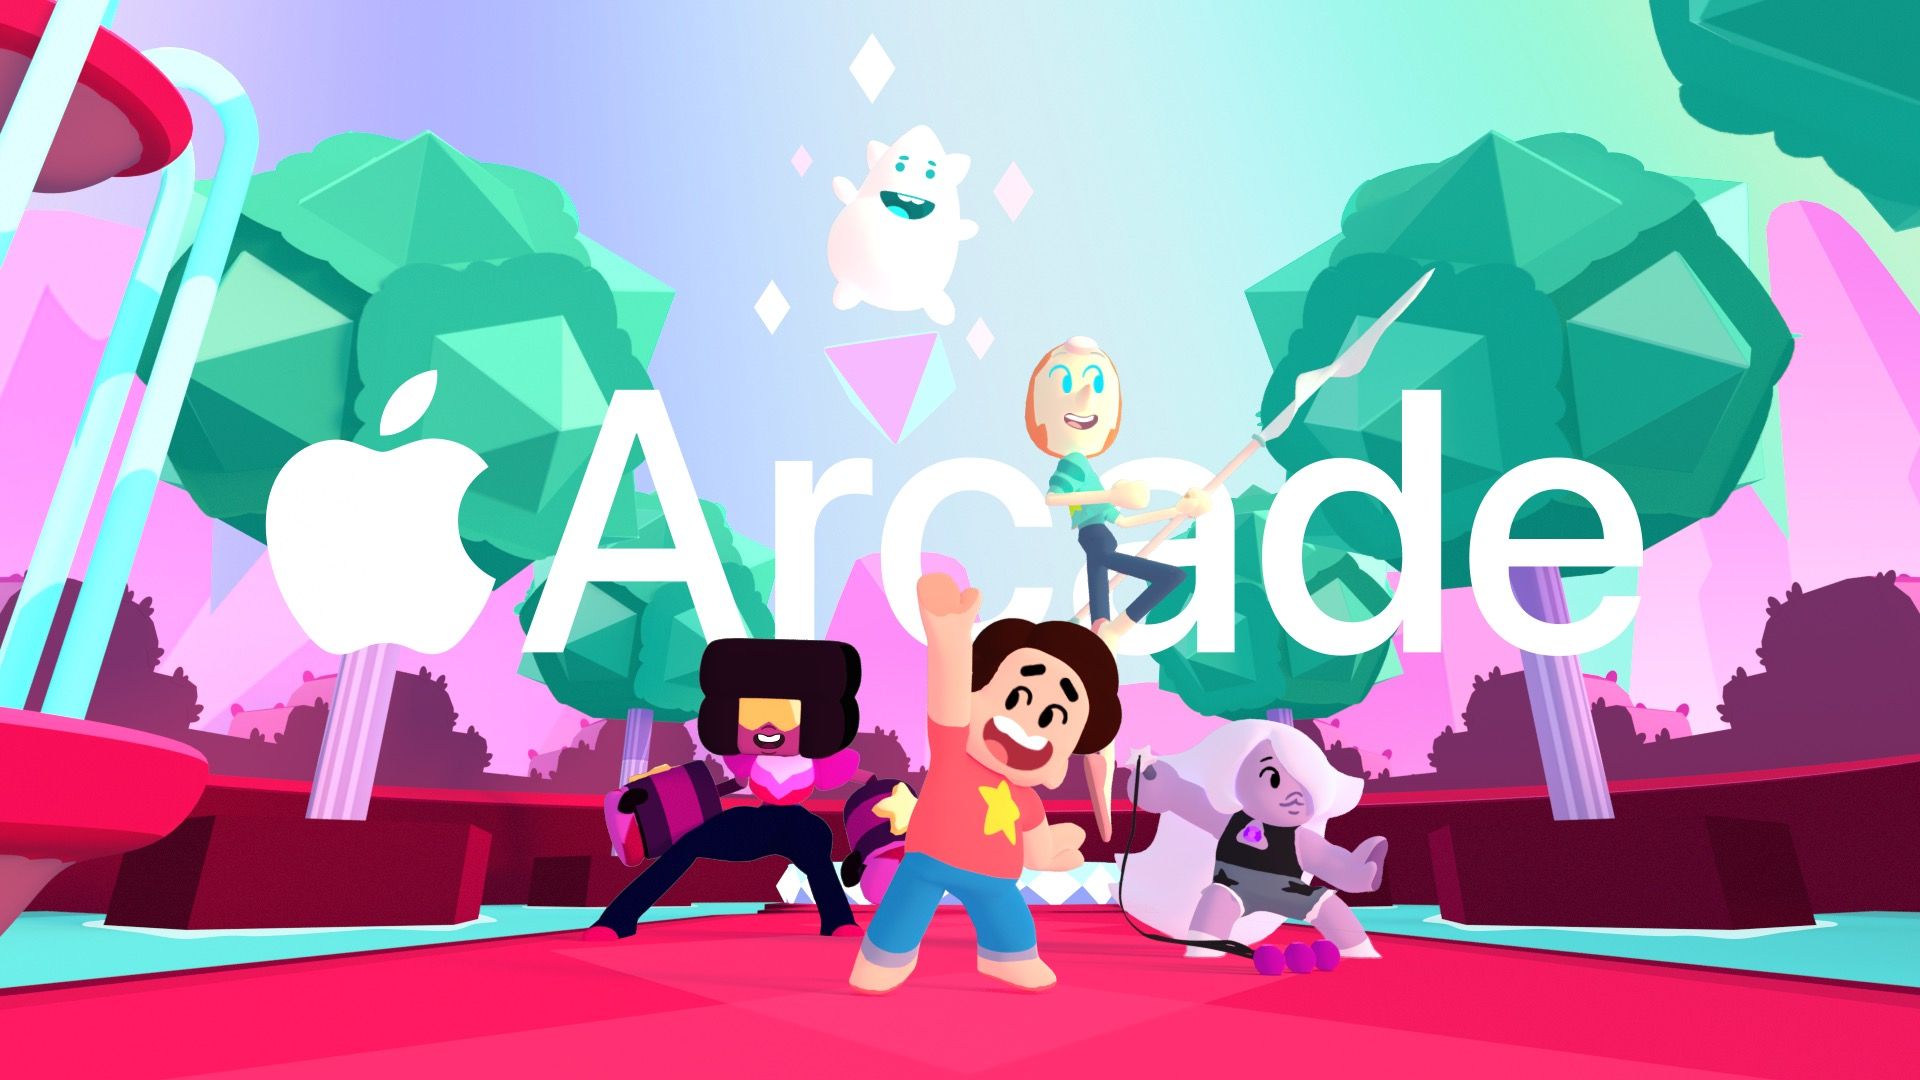 Apple Arcade Steven Universe: Unleash the Light, your skills can save the day. Just added to #AppleArcade, play it now